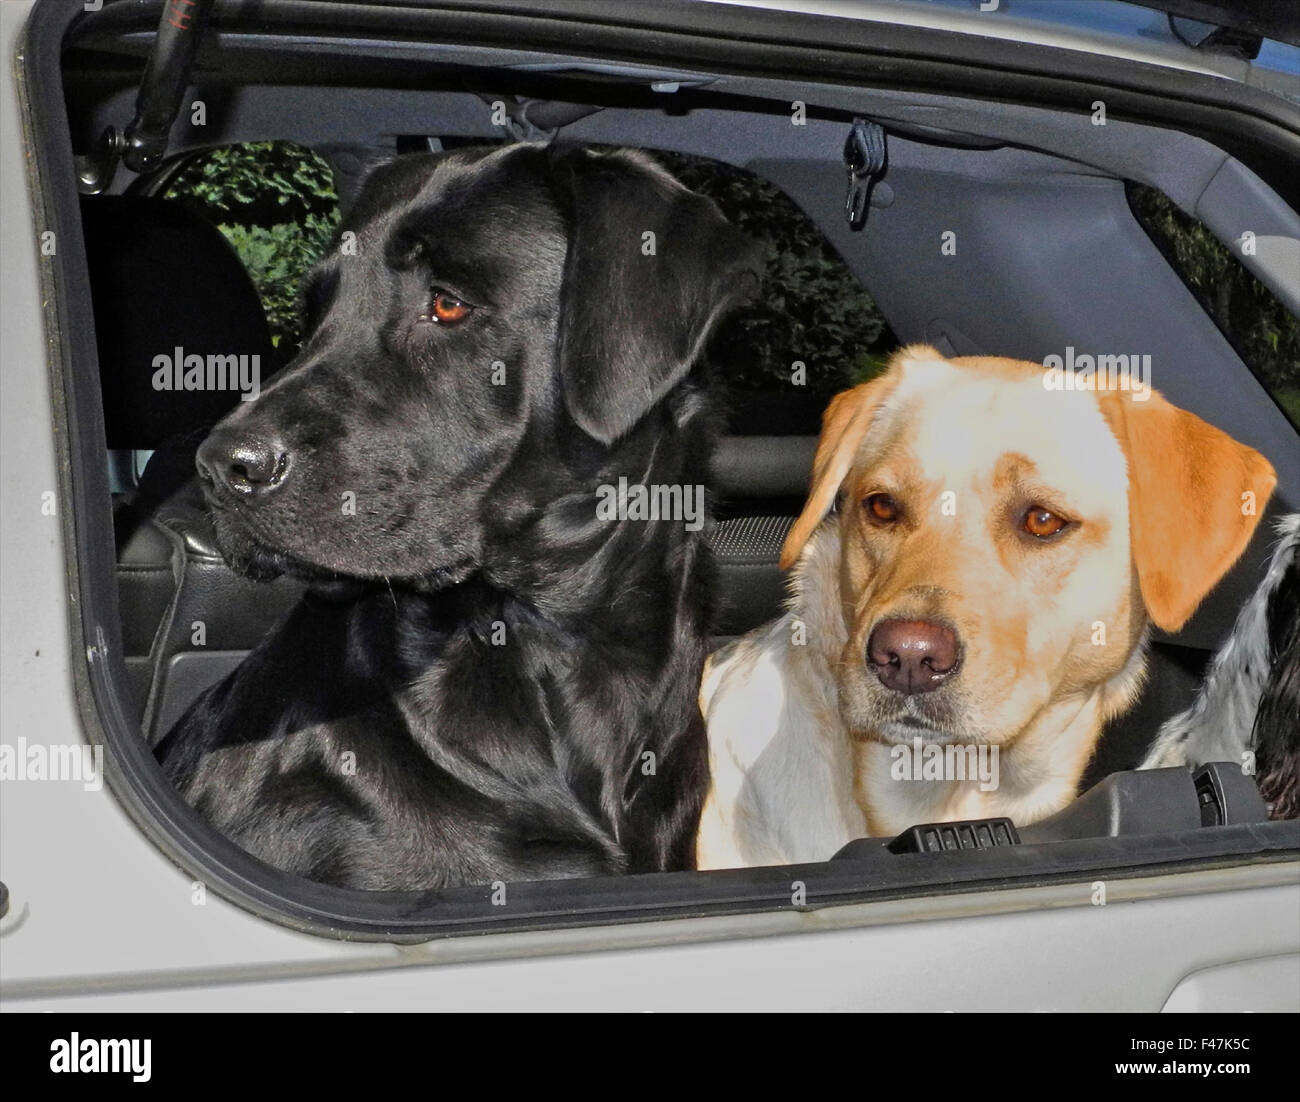 Two labrador dogs yellow and black in boot of car alert guarding Stock Photo